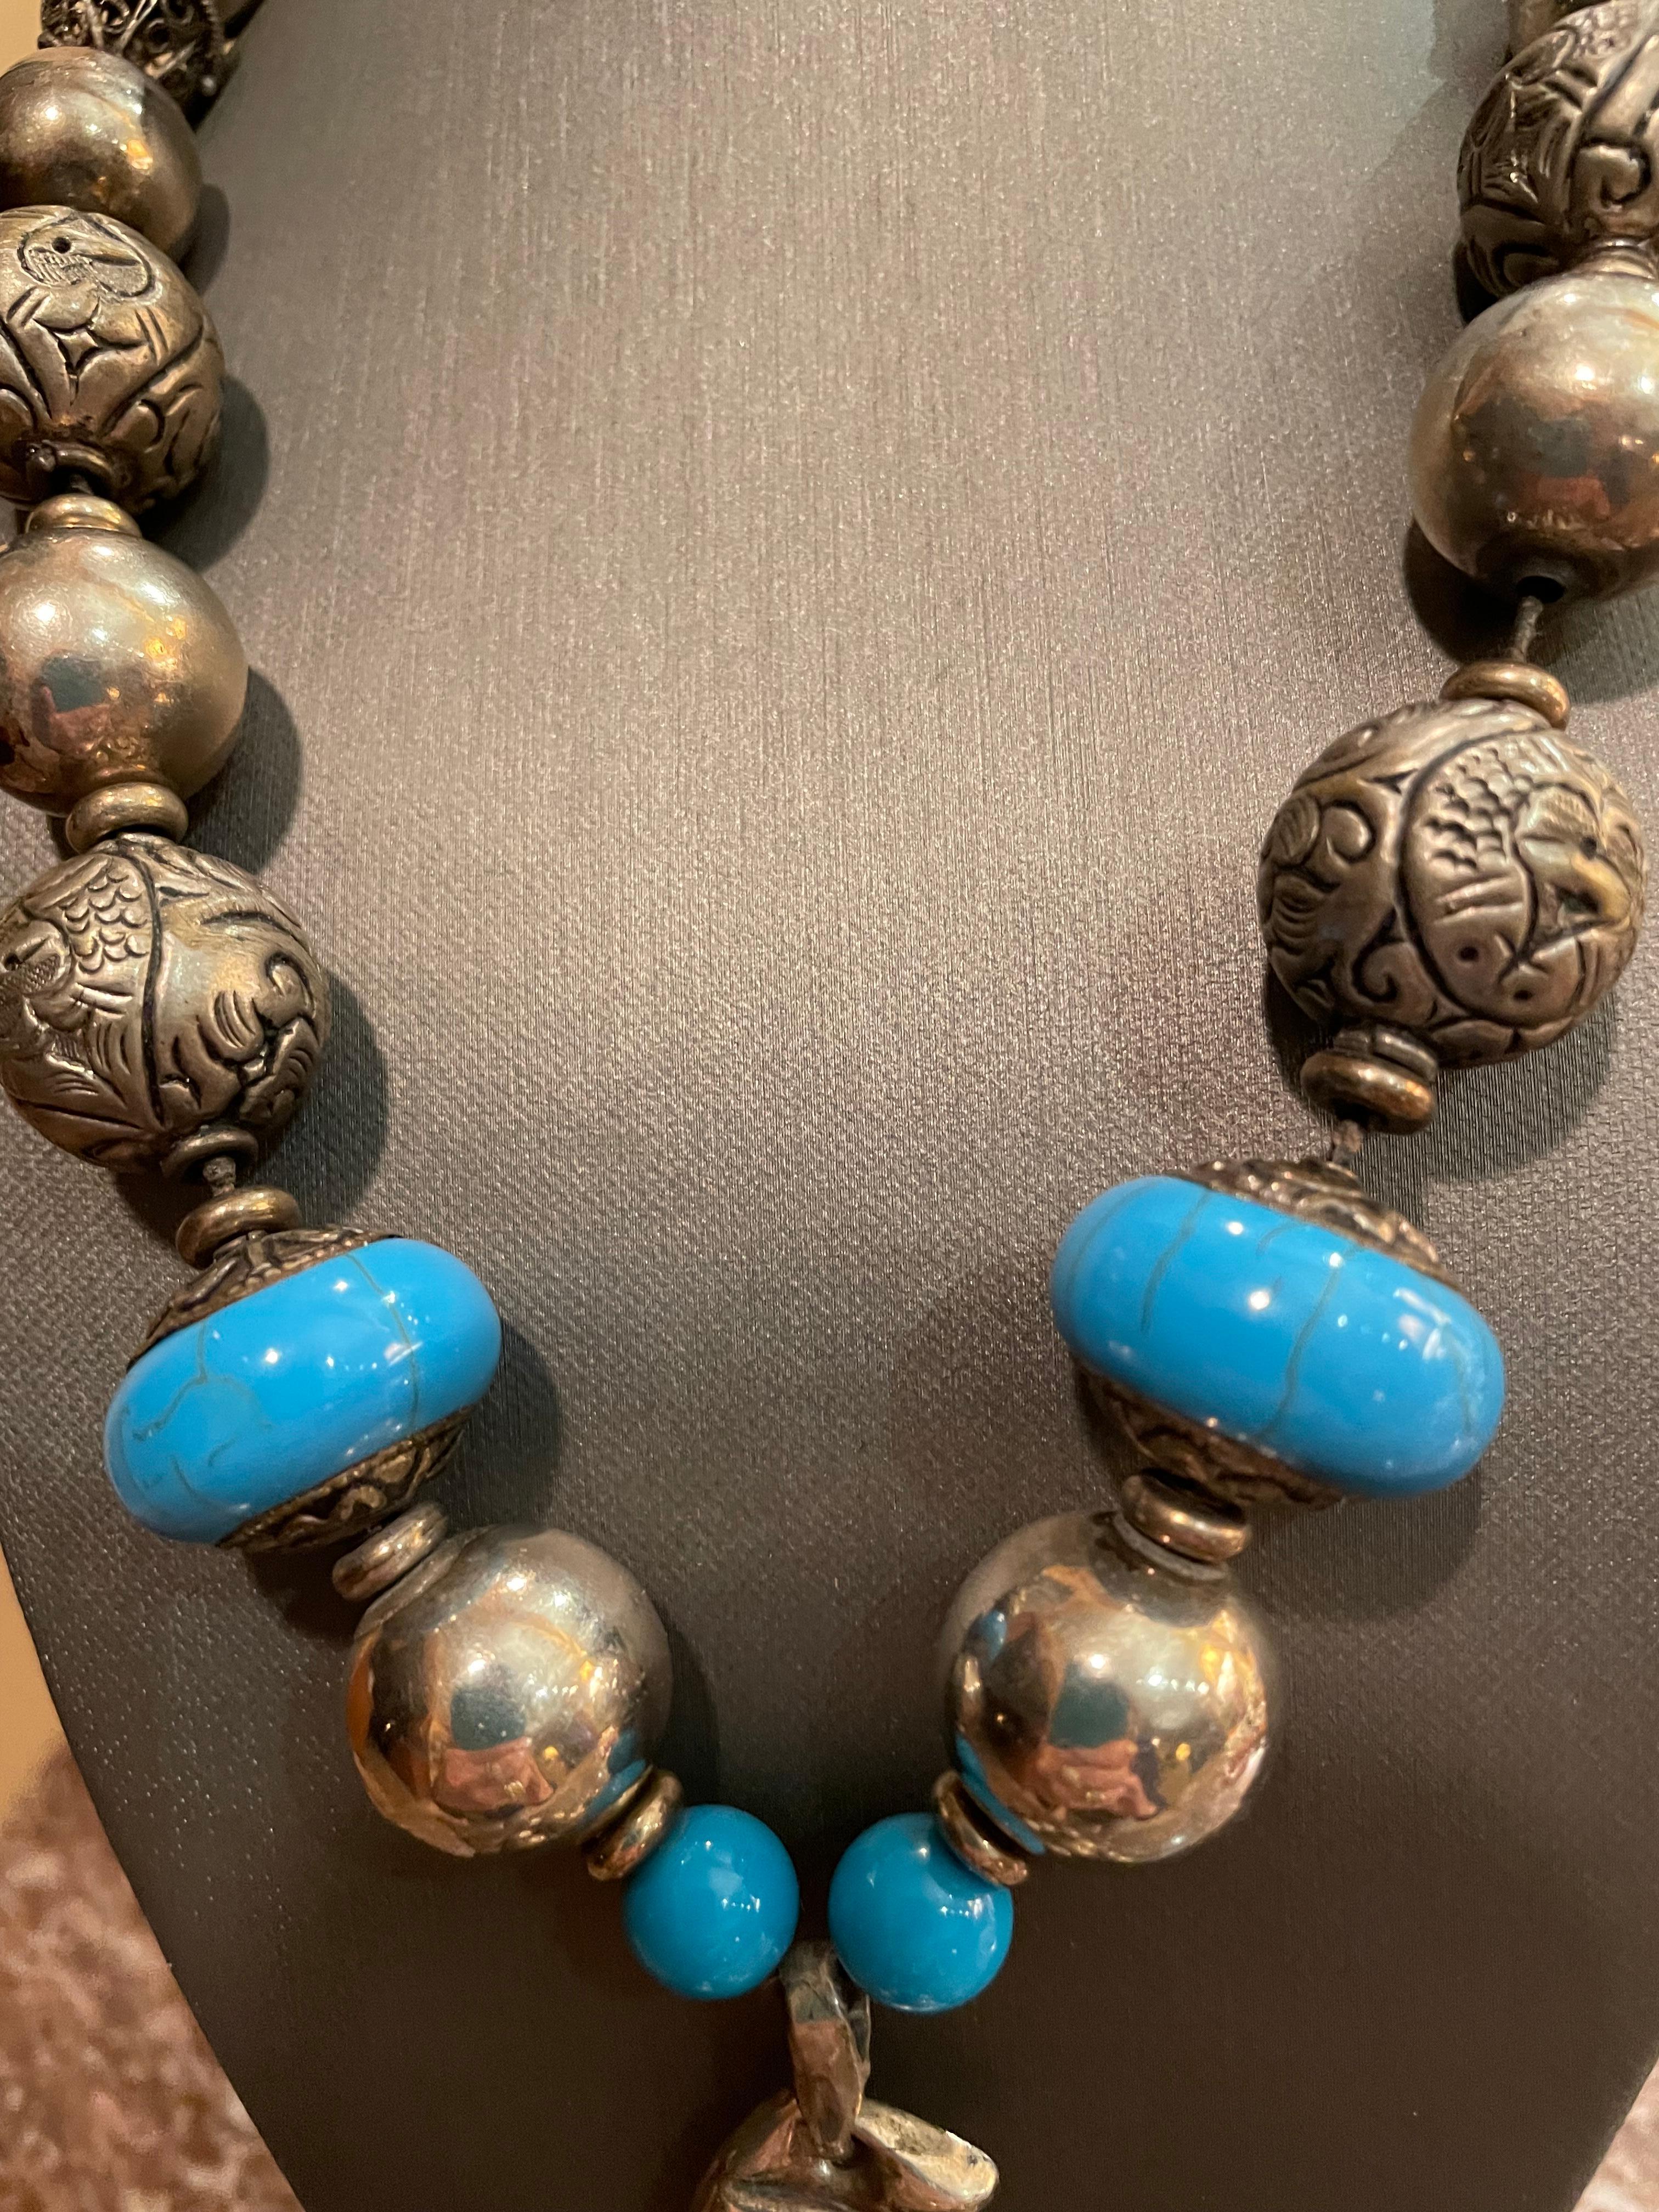 Vintage Sterling silver grapes pendant is centerpiece of handmade, one of a kind necklace from Lorraine’s Bijoux. This centerpiece hangs on a luscious string of Sterling  silver Mexican beads and silver Tibetan/turquoise engraved beads. Antique